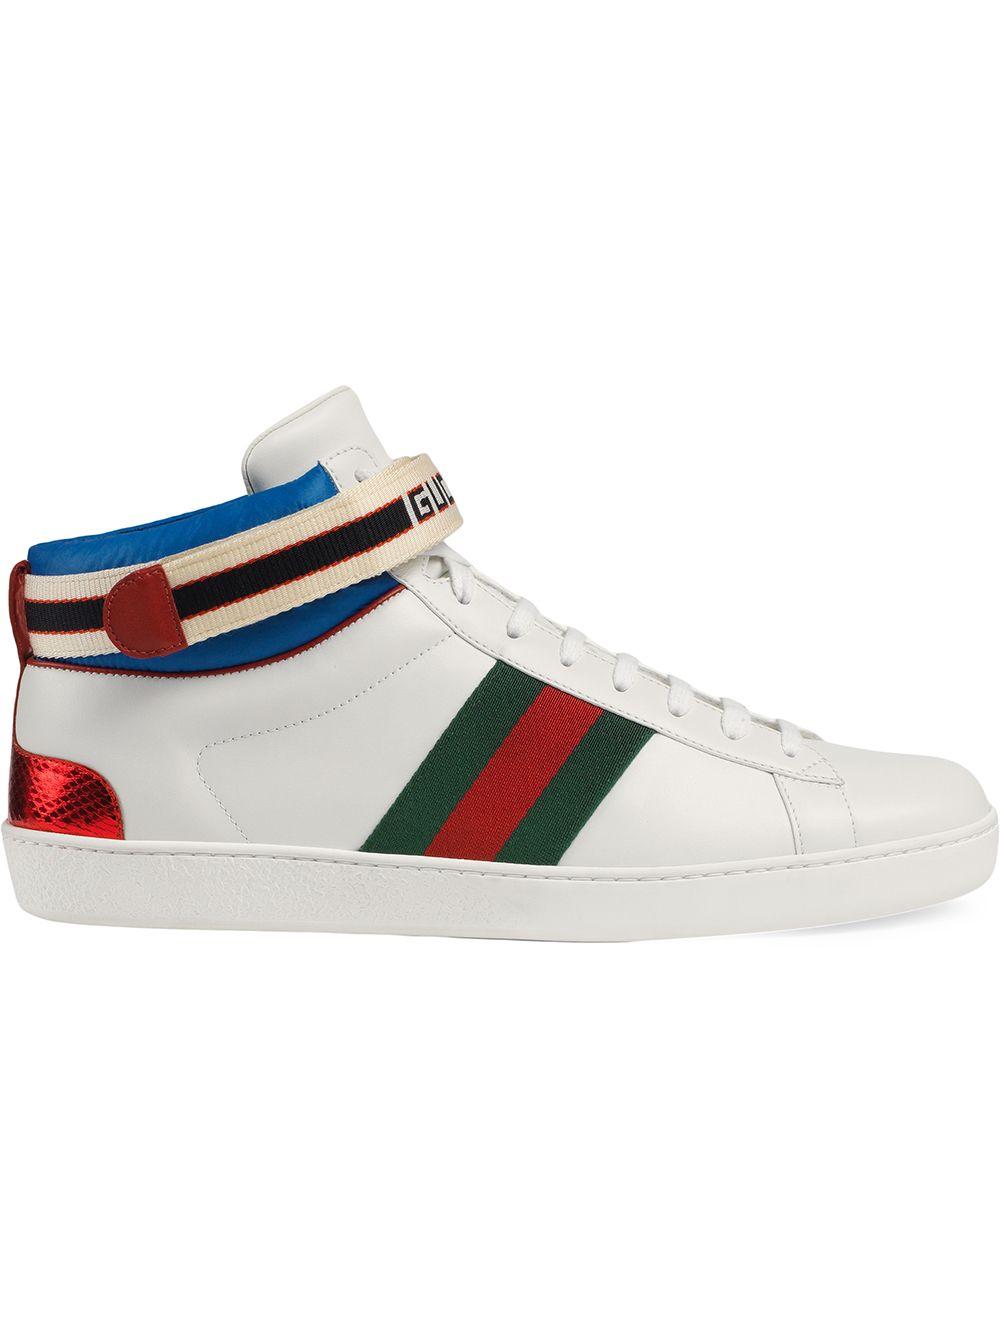 Gucci Leather Ace Stripe High-top Sneaker in White for Men - Lyst